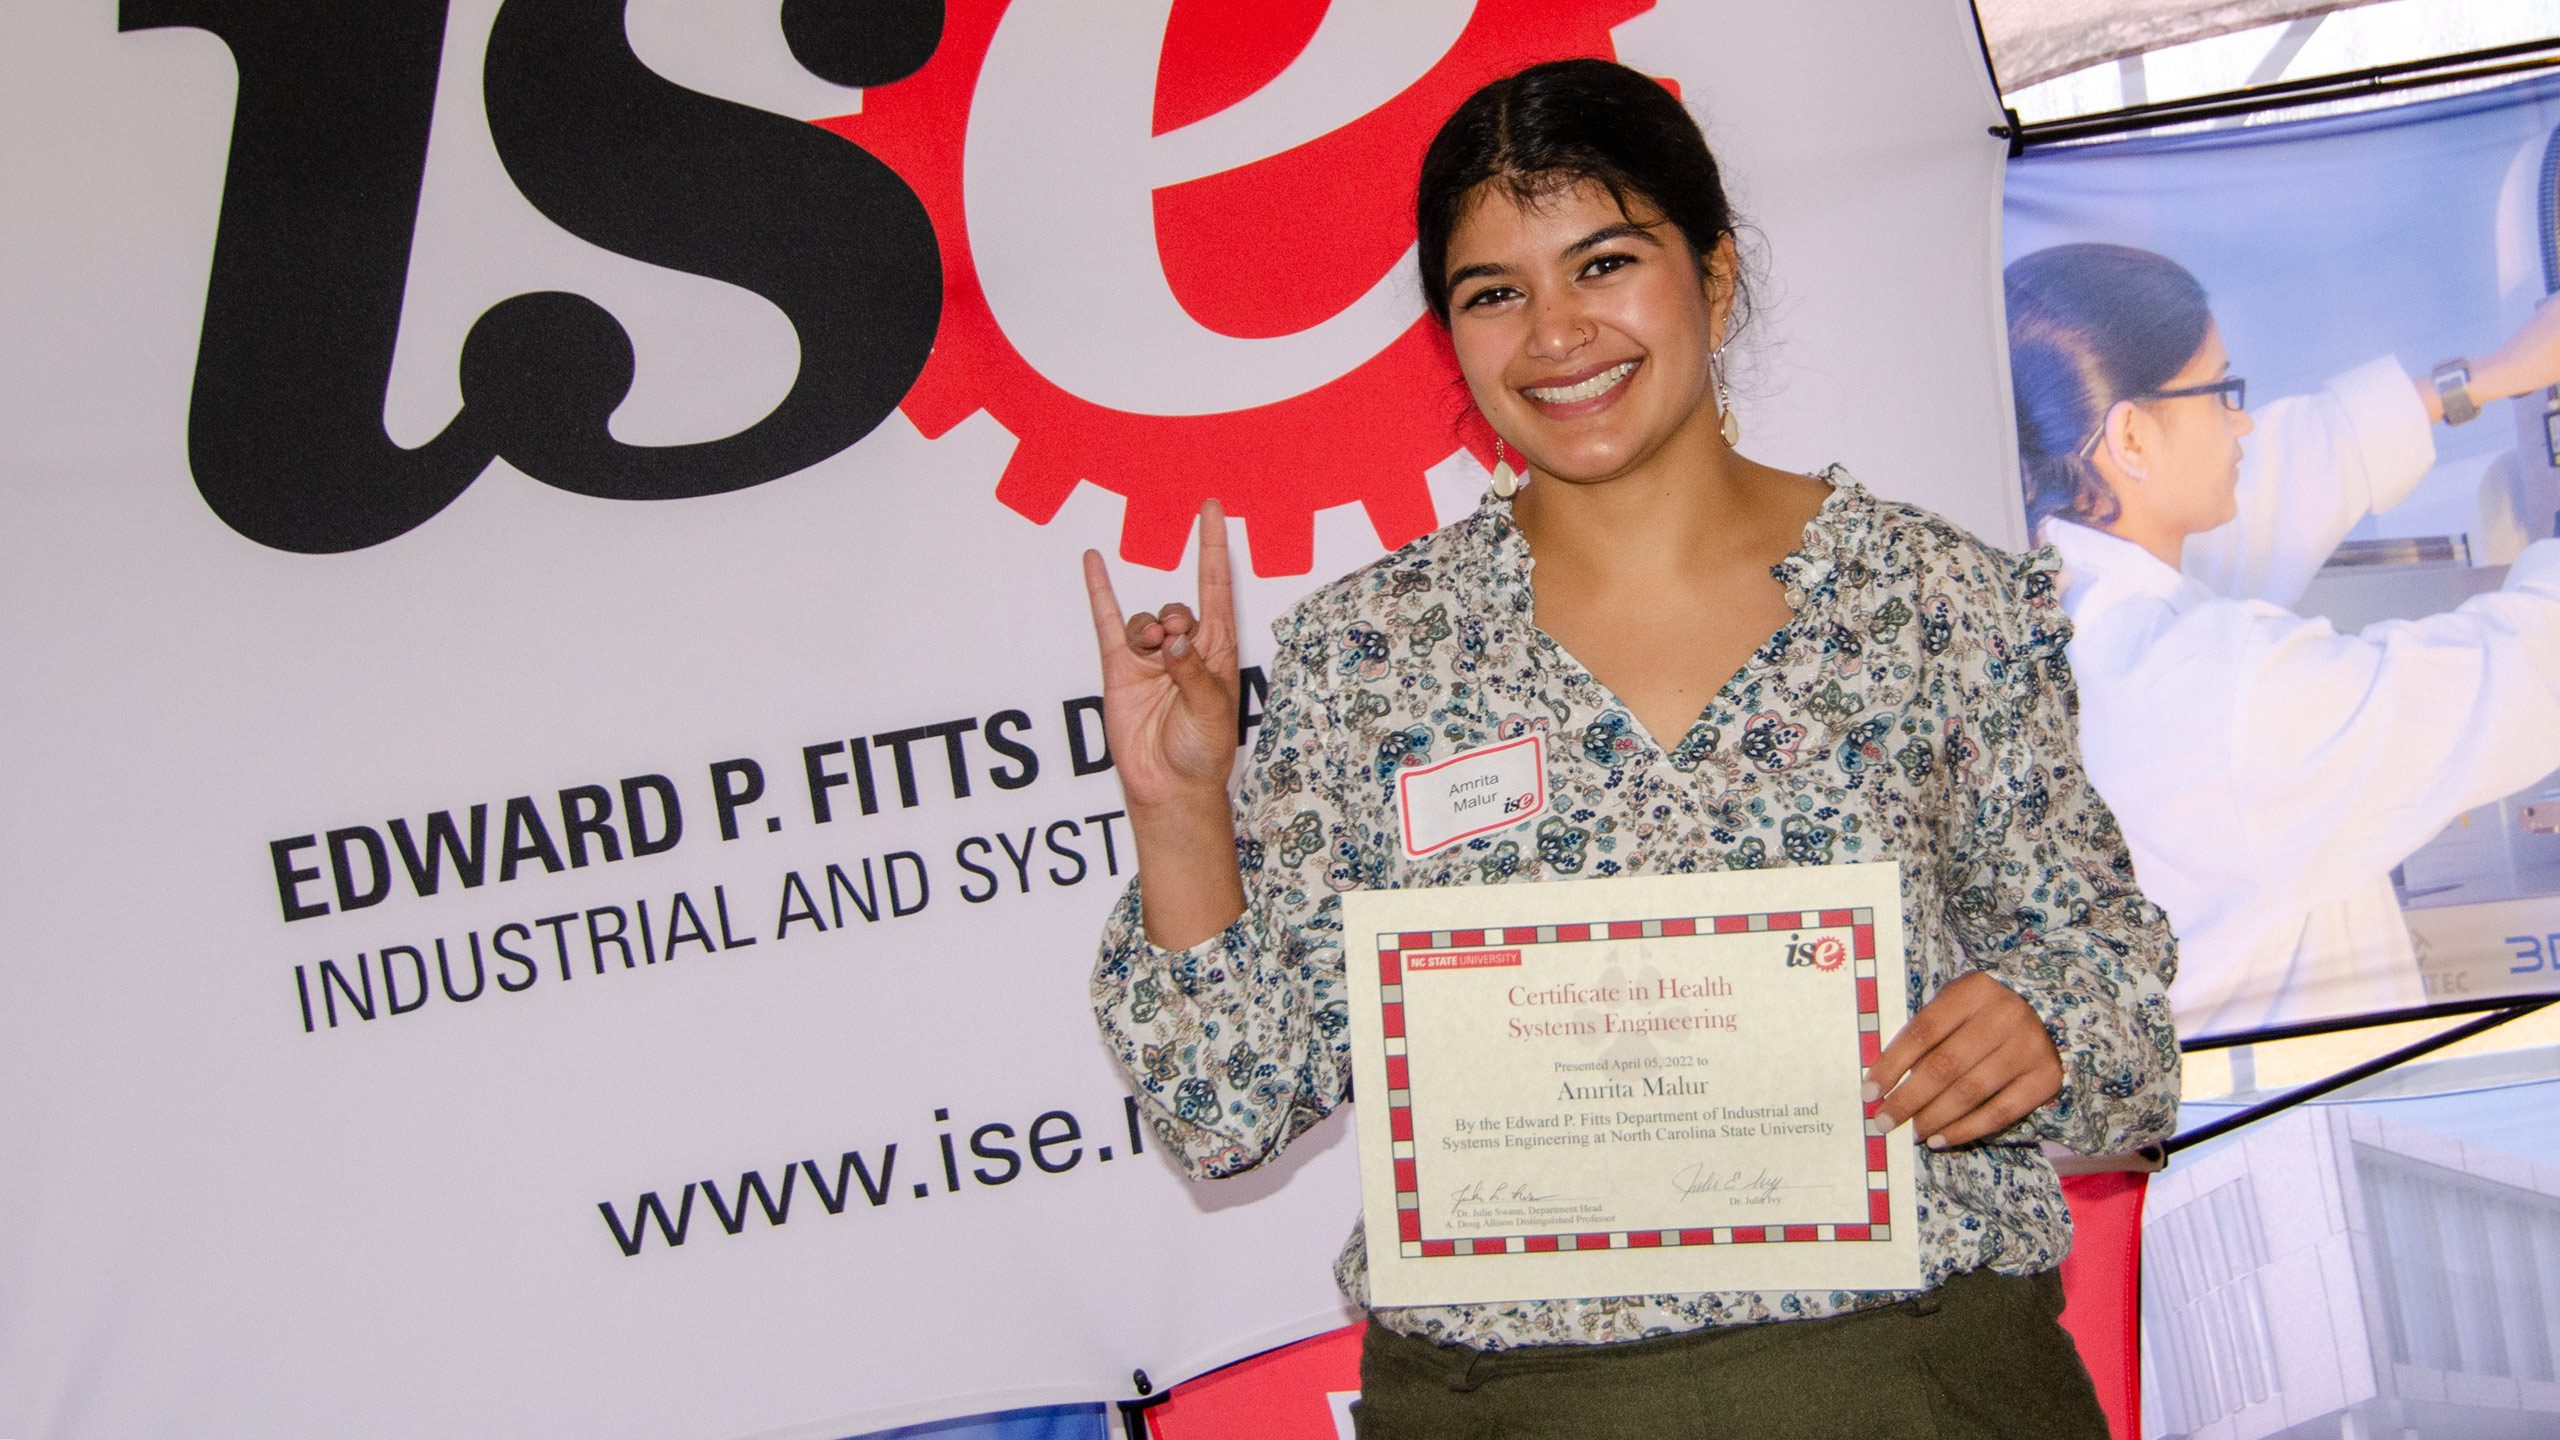 Amrita Malur receiving her Healthcare Systems Engineering Certificate at the 2022 C.A. Anderson Awards